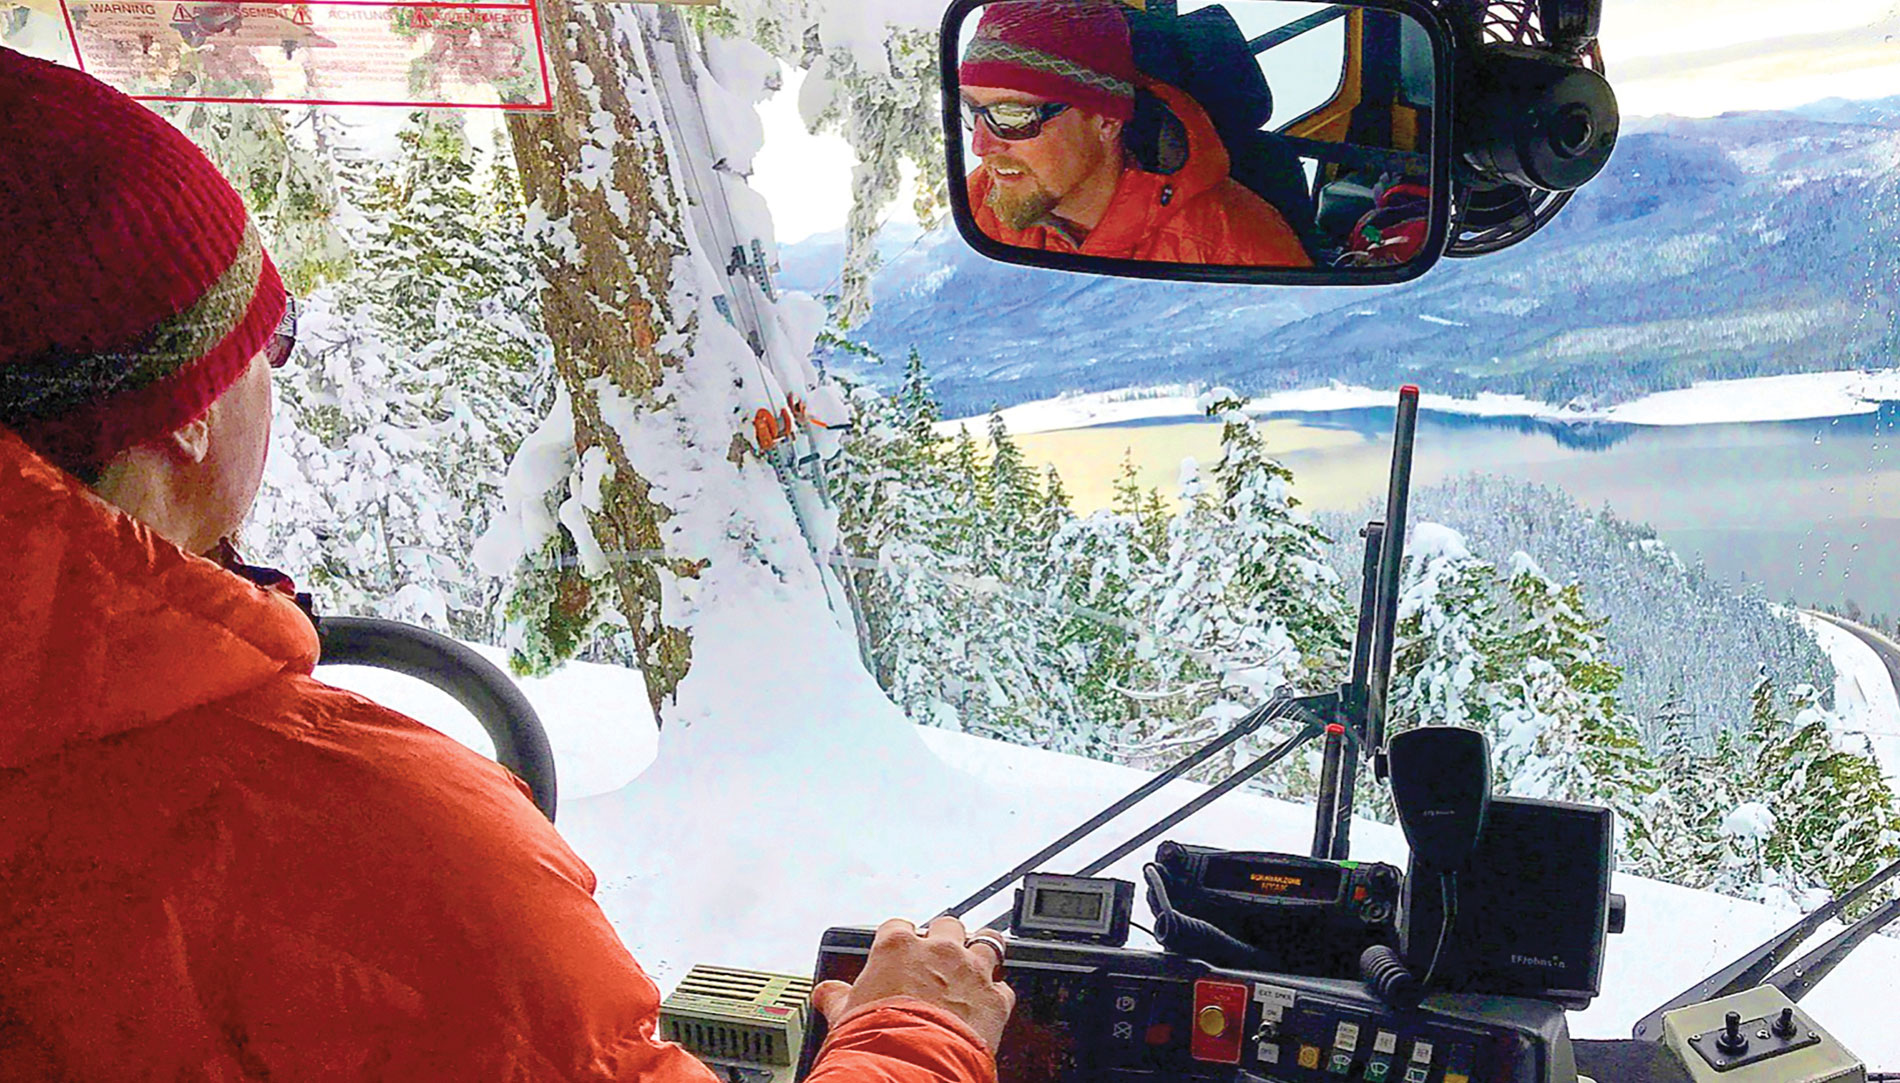 Avalanche control expert John Stimberis drives a snowcat in the mountains above Interstate 90 through the Cascade Mountains